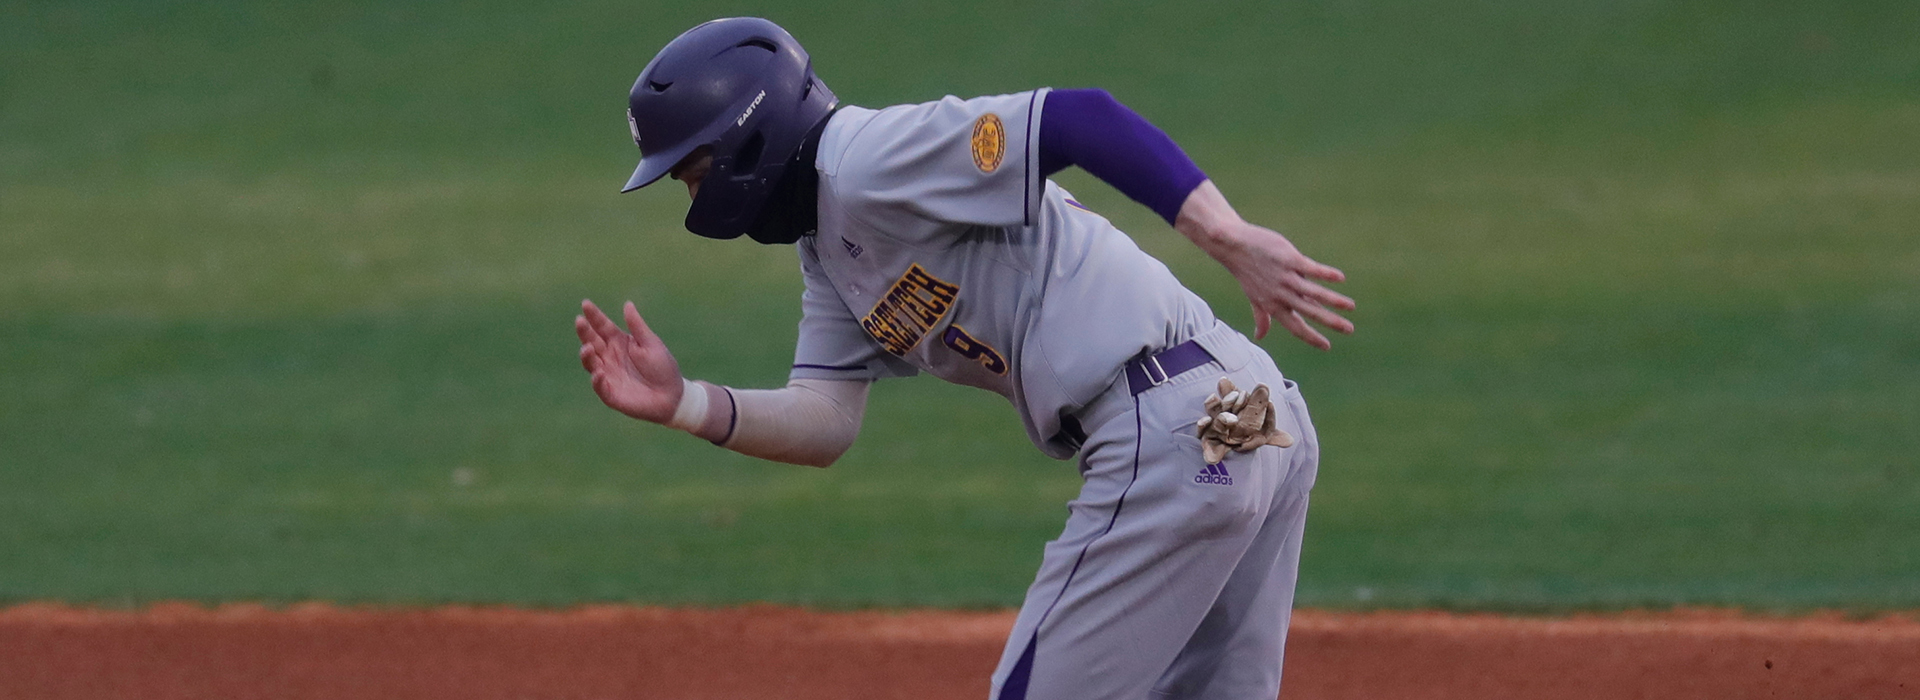 Bats stay hot as Golden Eagles cruise to 18-4 win at North Alabama